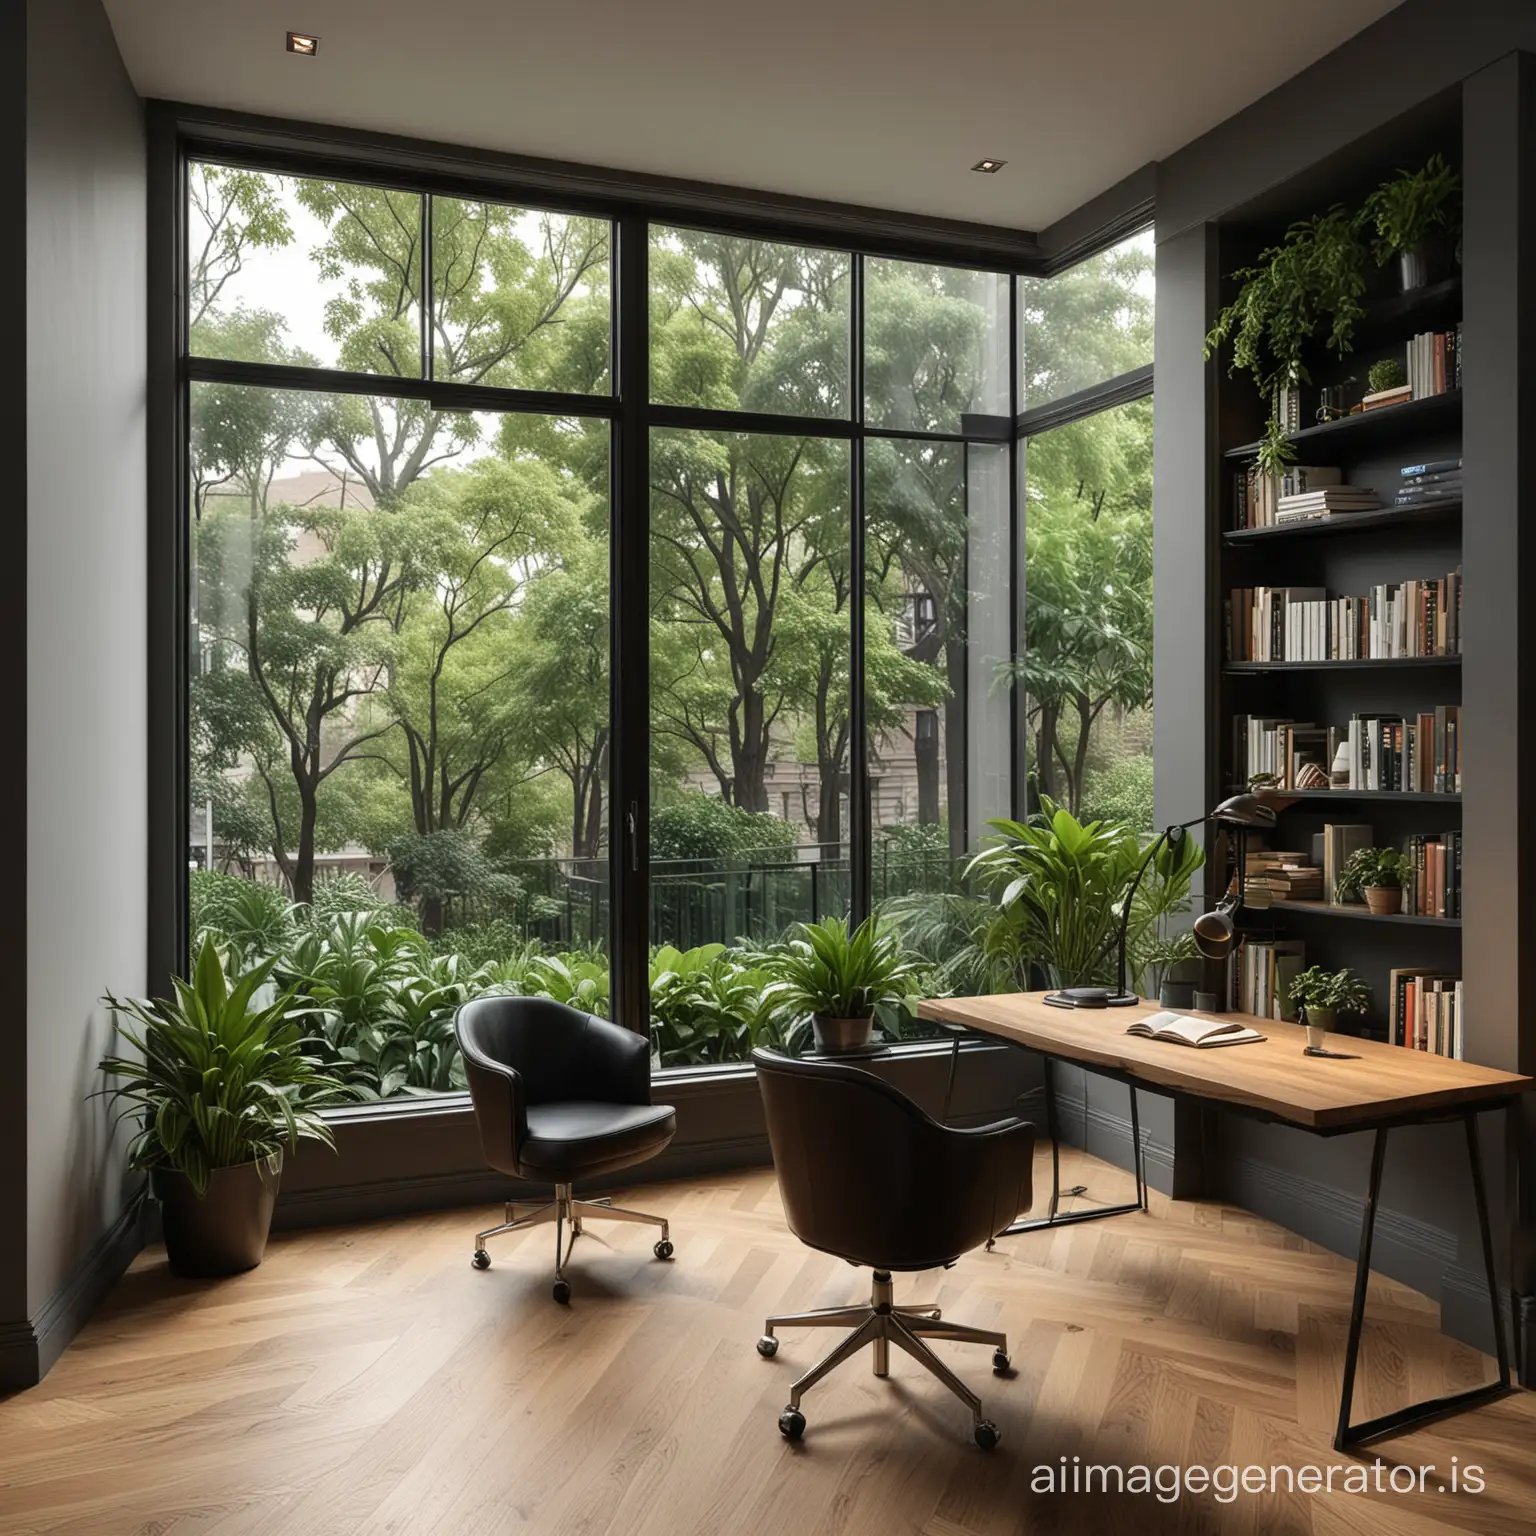 Interior design. Dark study room with indoor plants. Sophisticated space with oak floors. Second floor open with a library and chair above. Single glass pane window shows a city park outside. Classy, sophisticated, expensive.